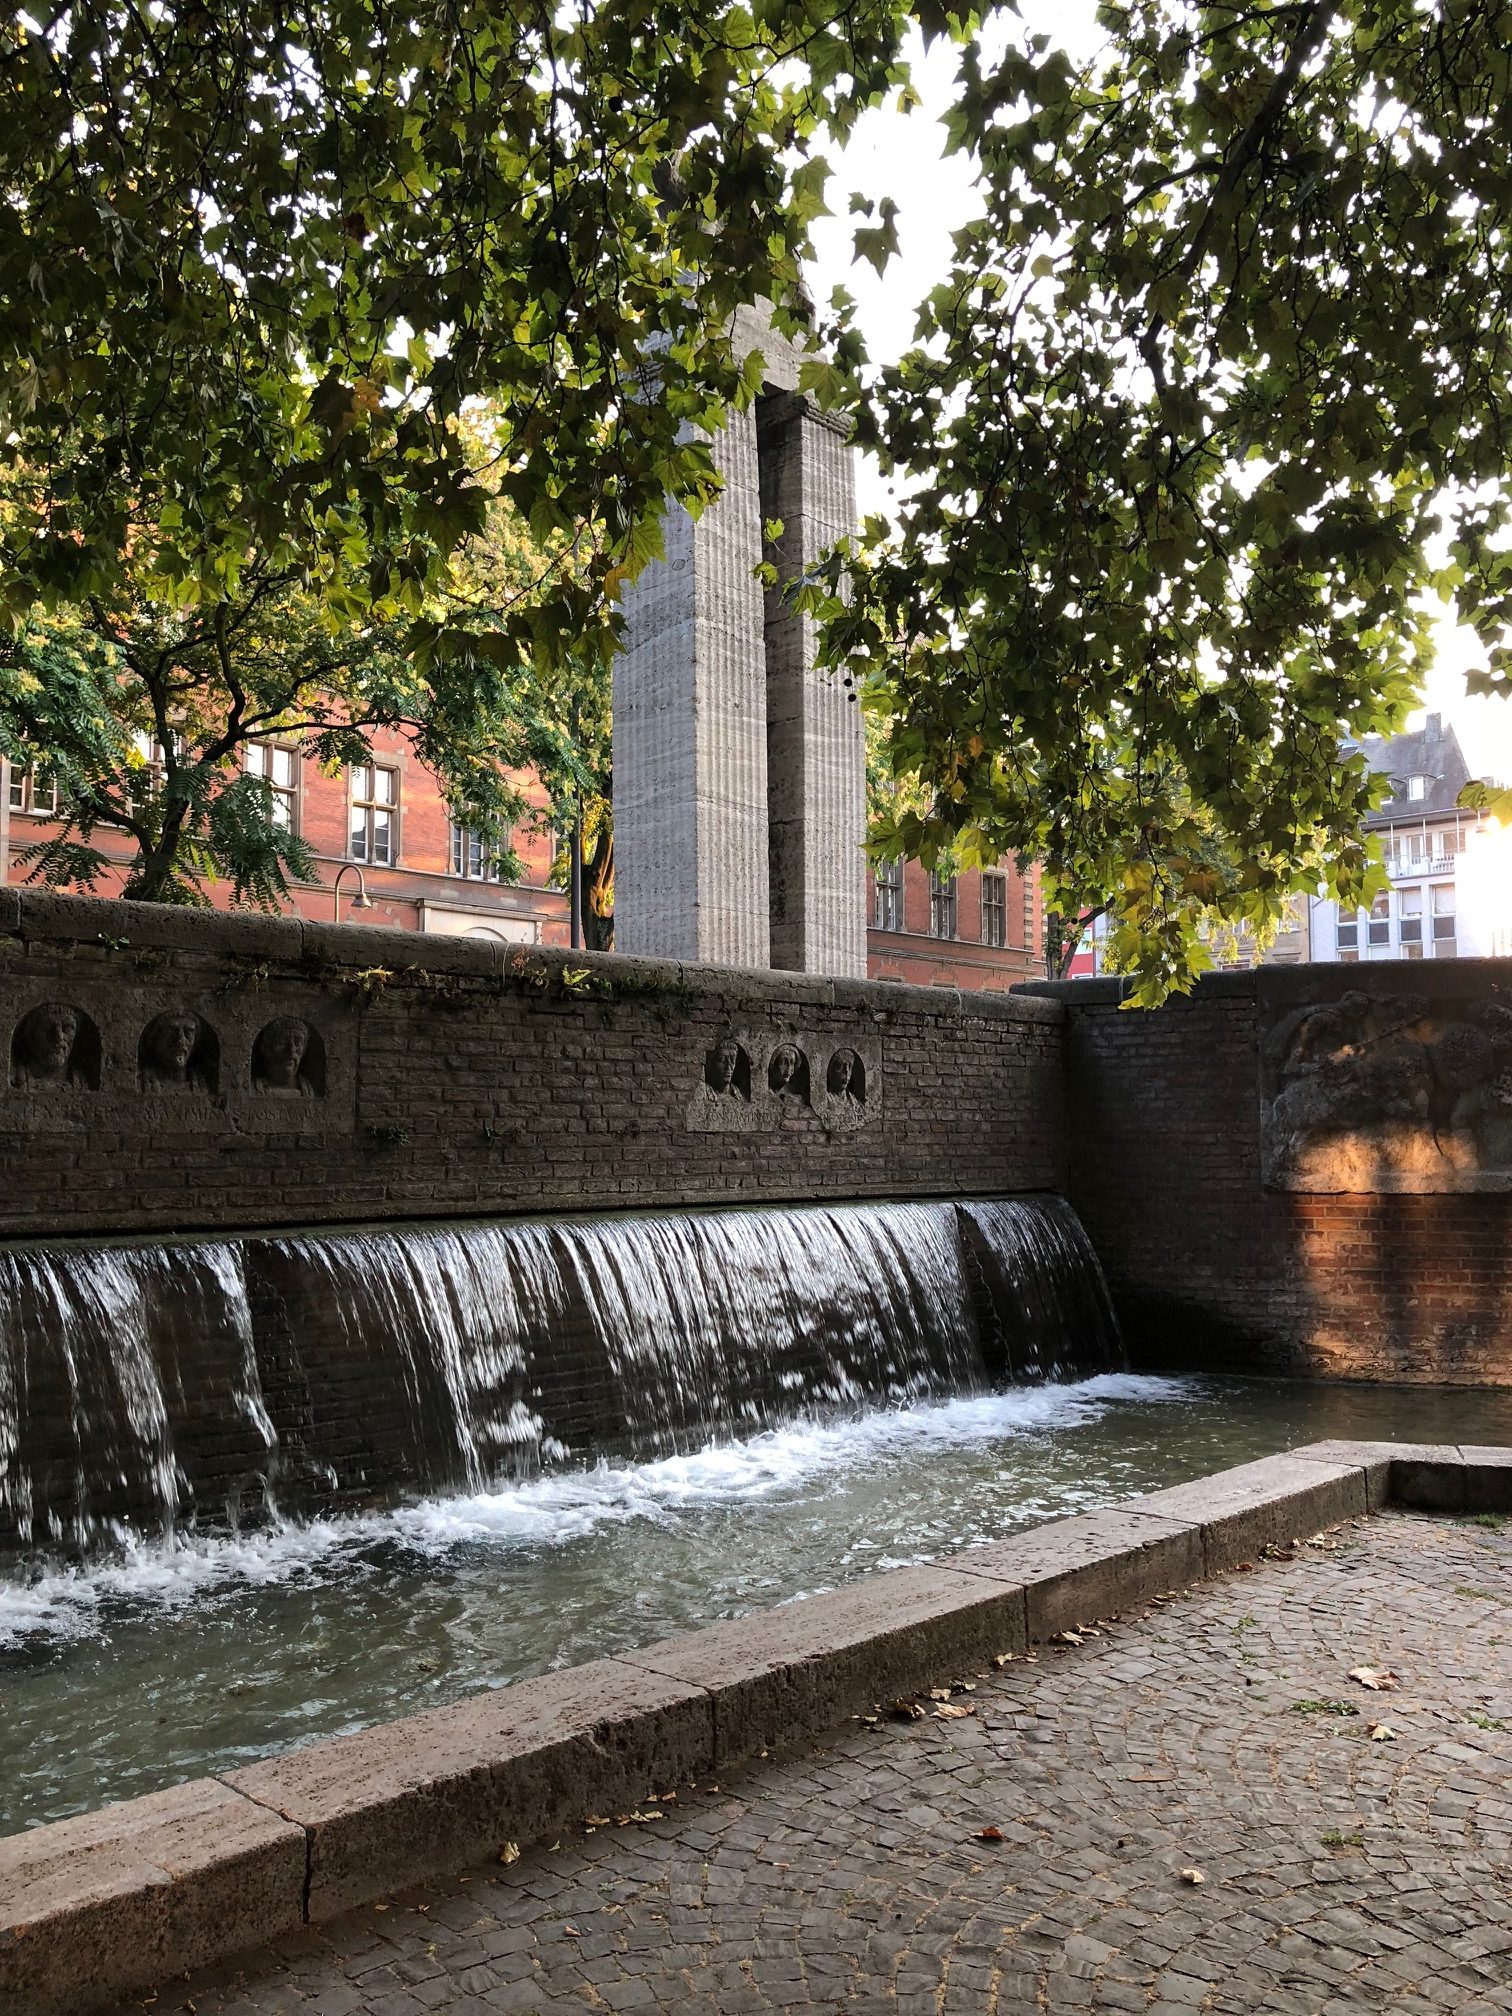 The fountain at the Cologne City Museum